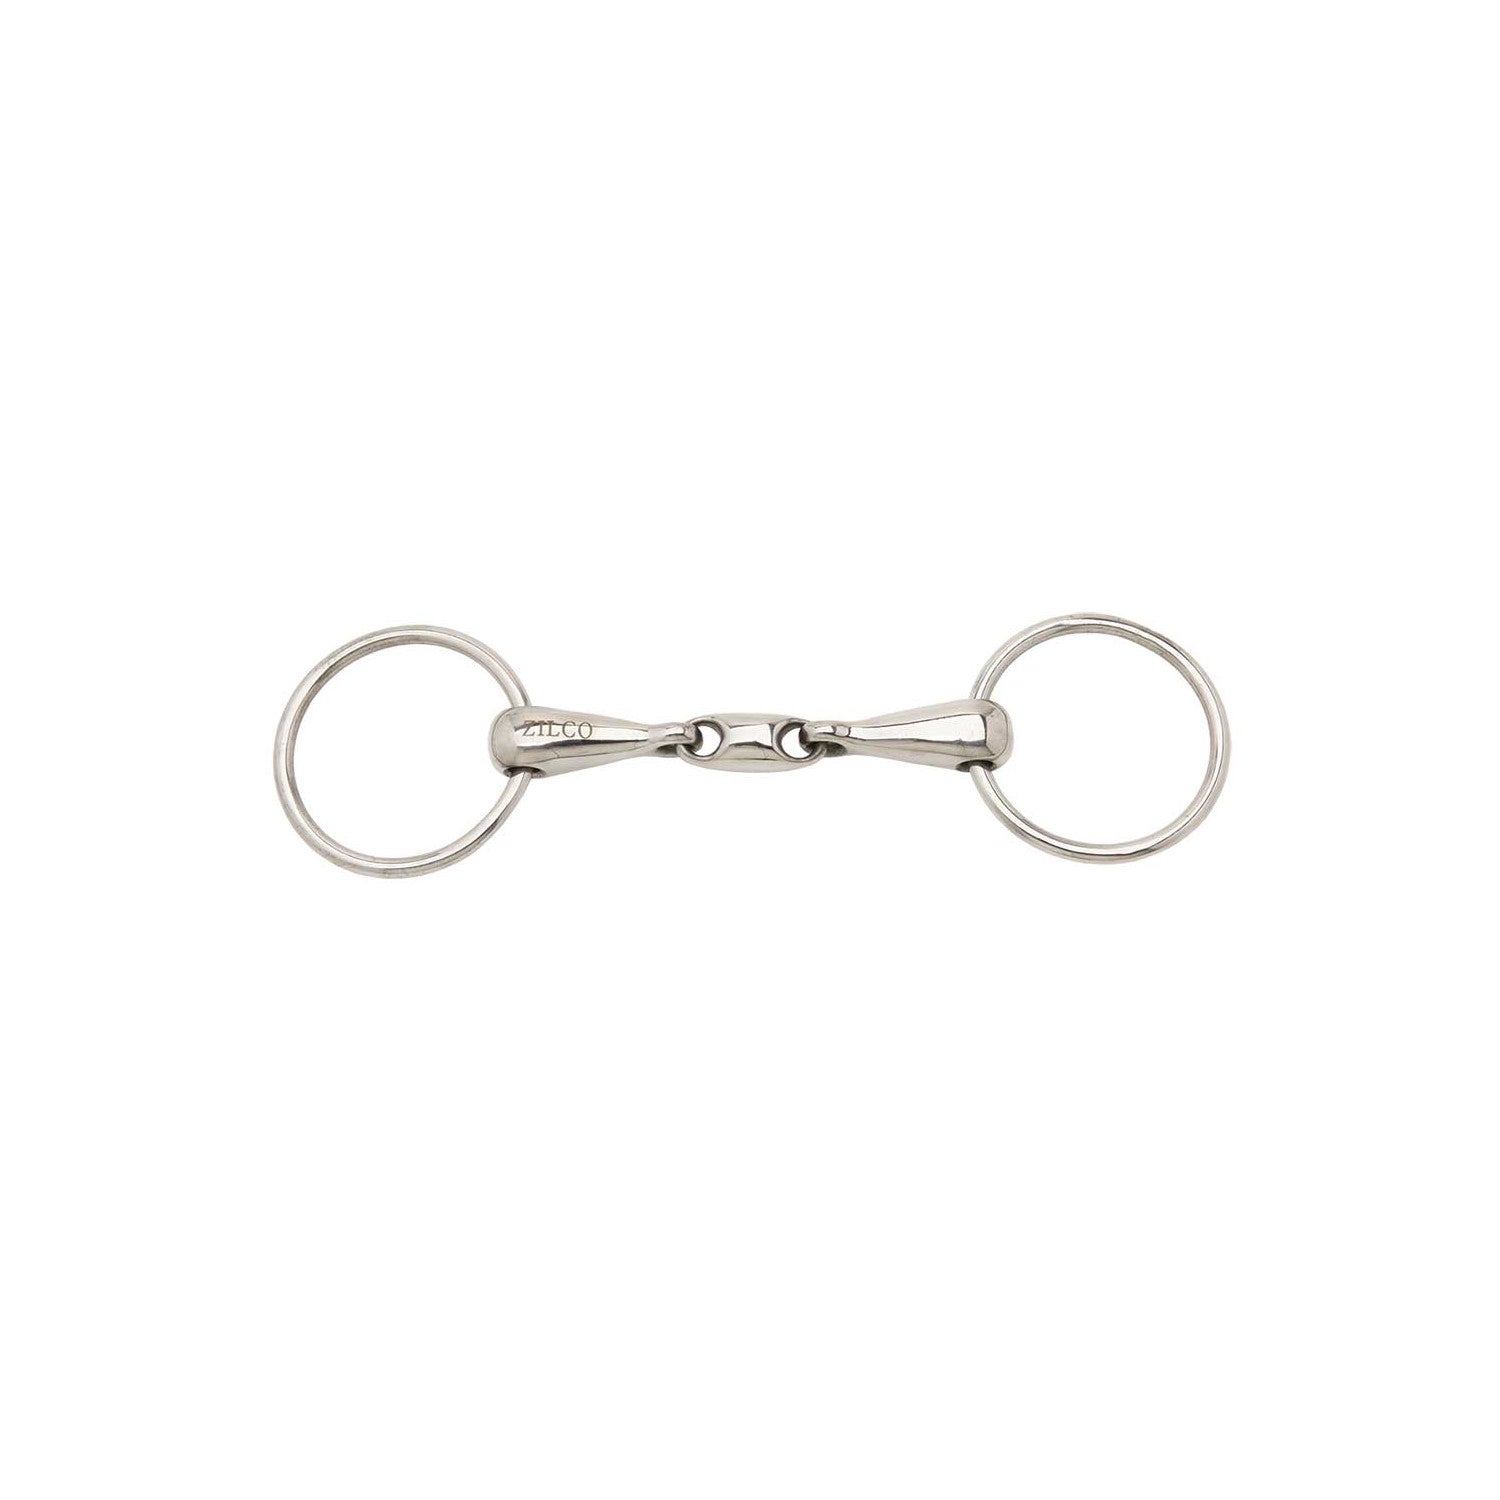 Zilco Thick Mouth Training Snaffle